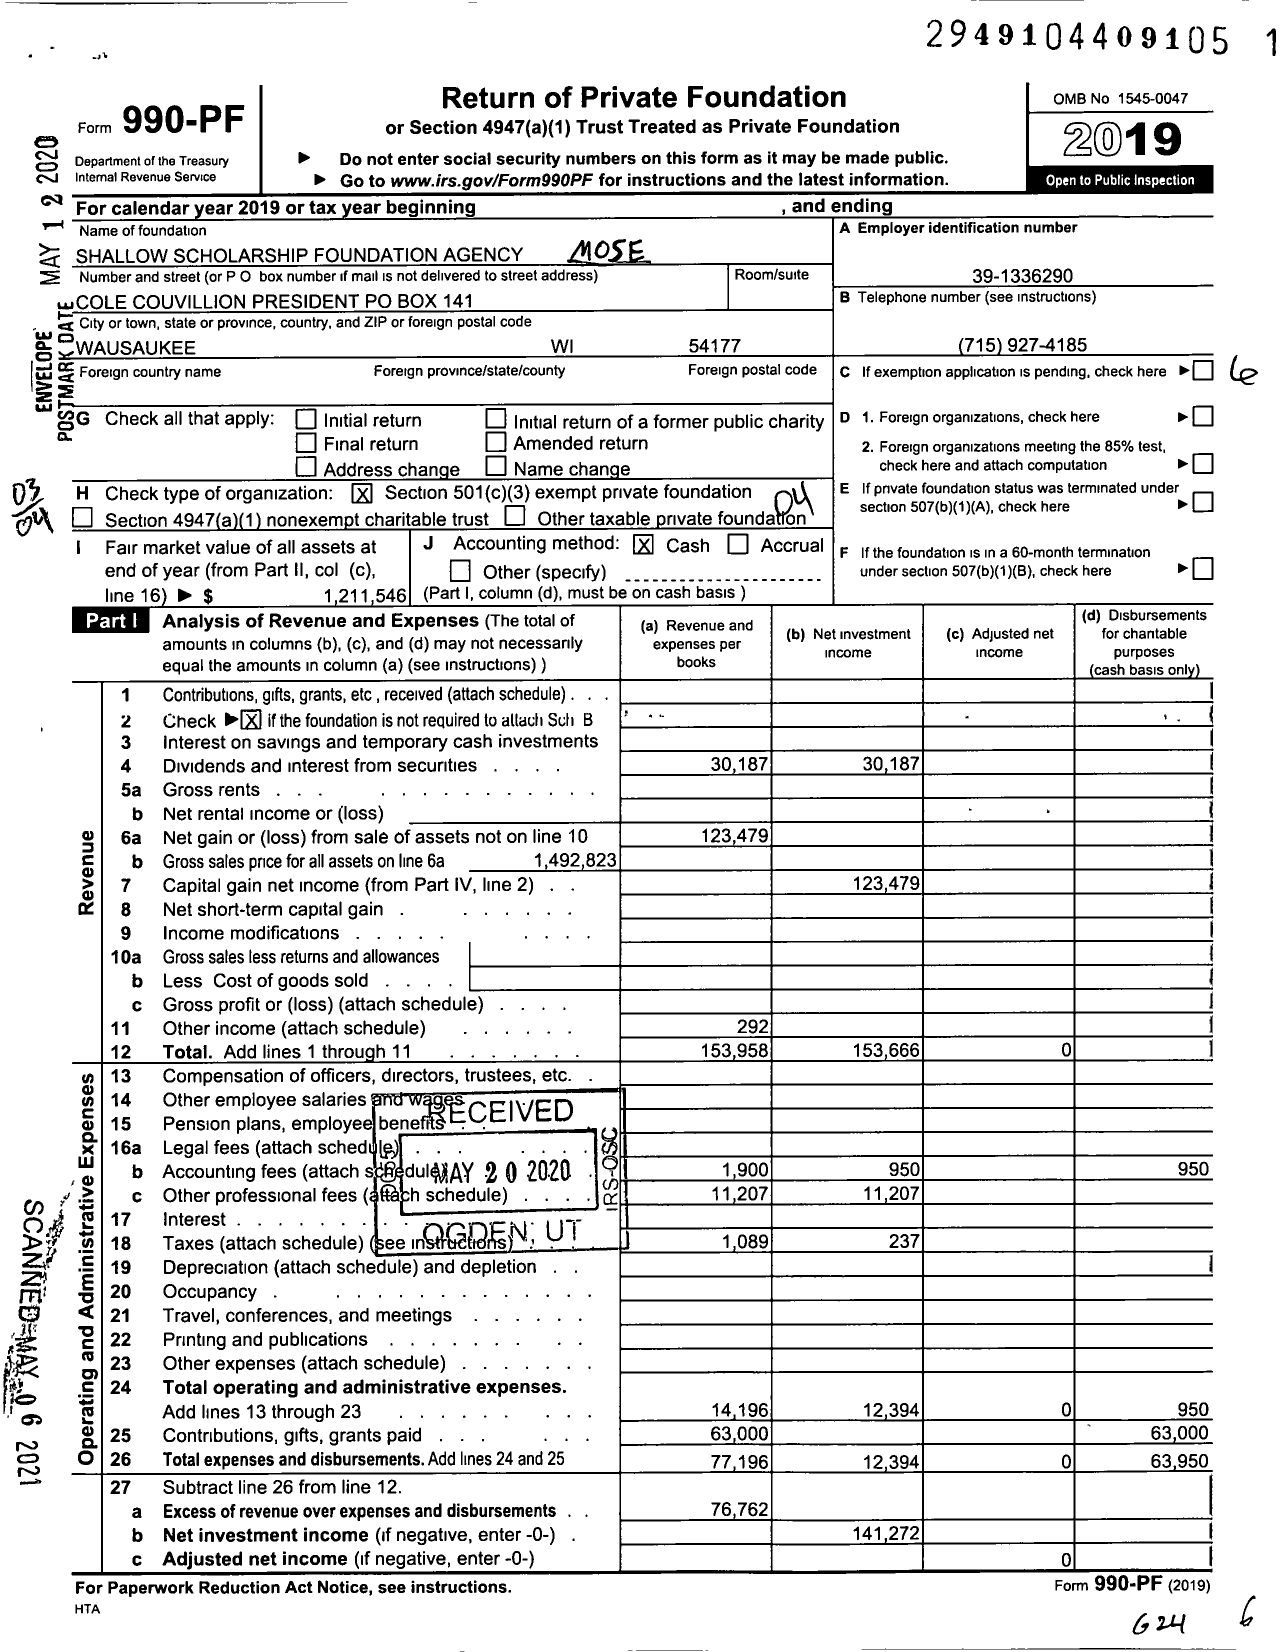 Image of first page of 2019 Form 990PF for Shallow Scholarship Foundation Agency